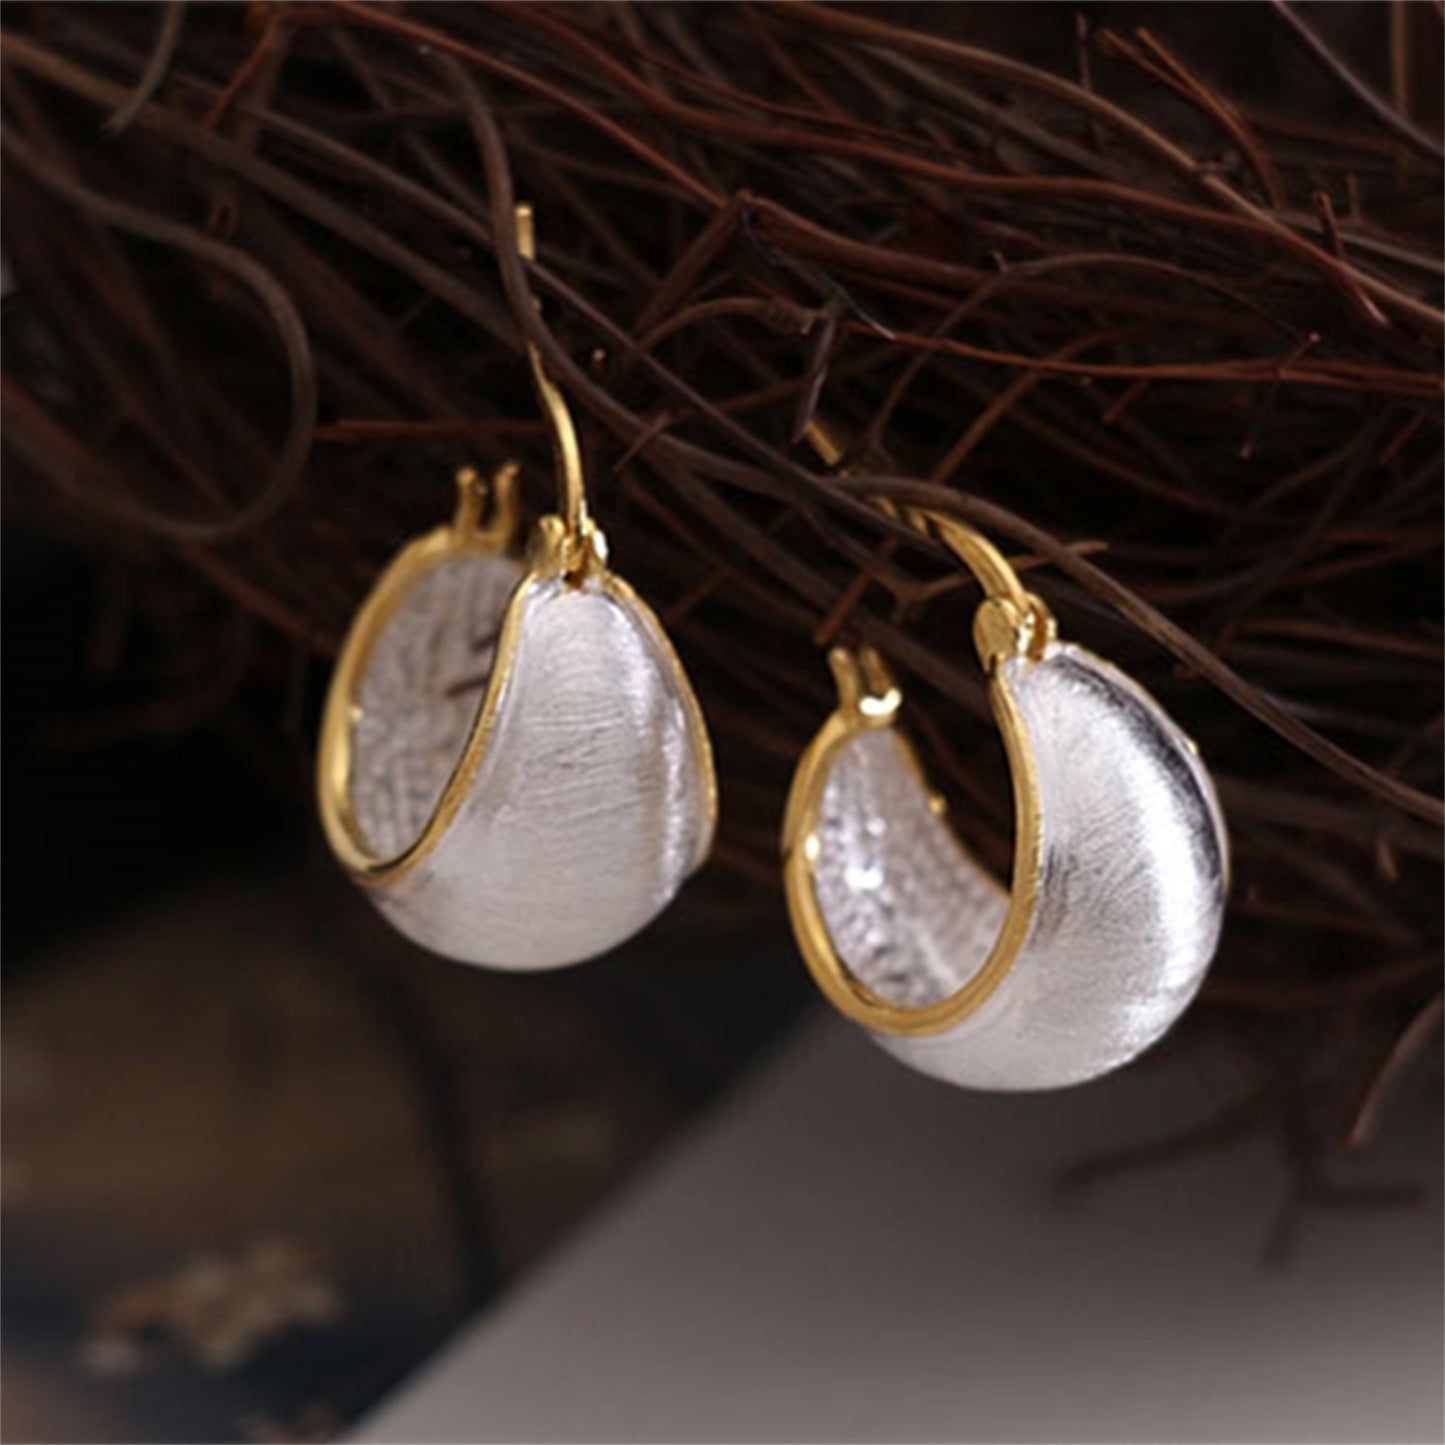 925 Sterling Silver Dome Sleeper Drop Hoop Earrings with Brushed Golden Line